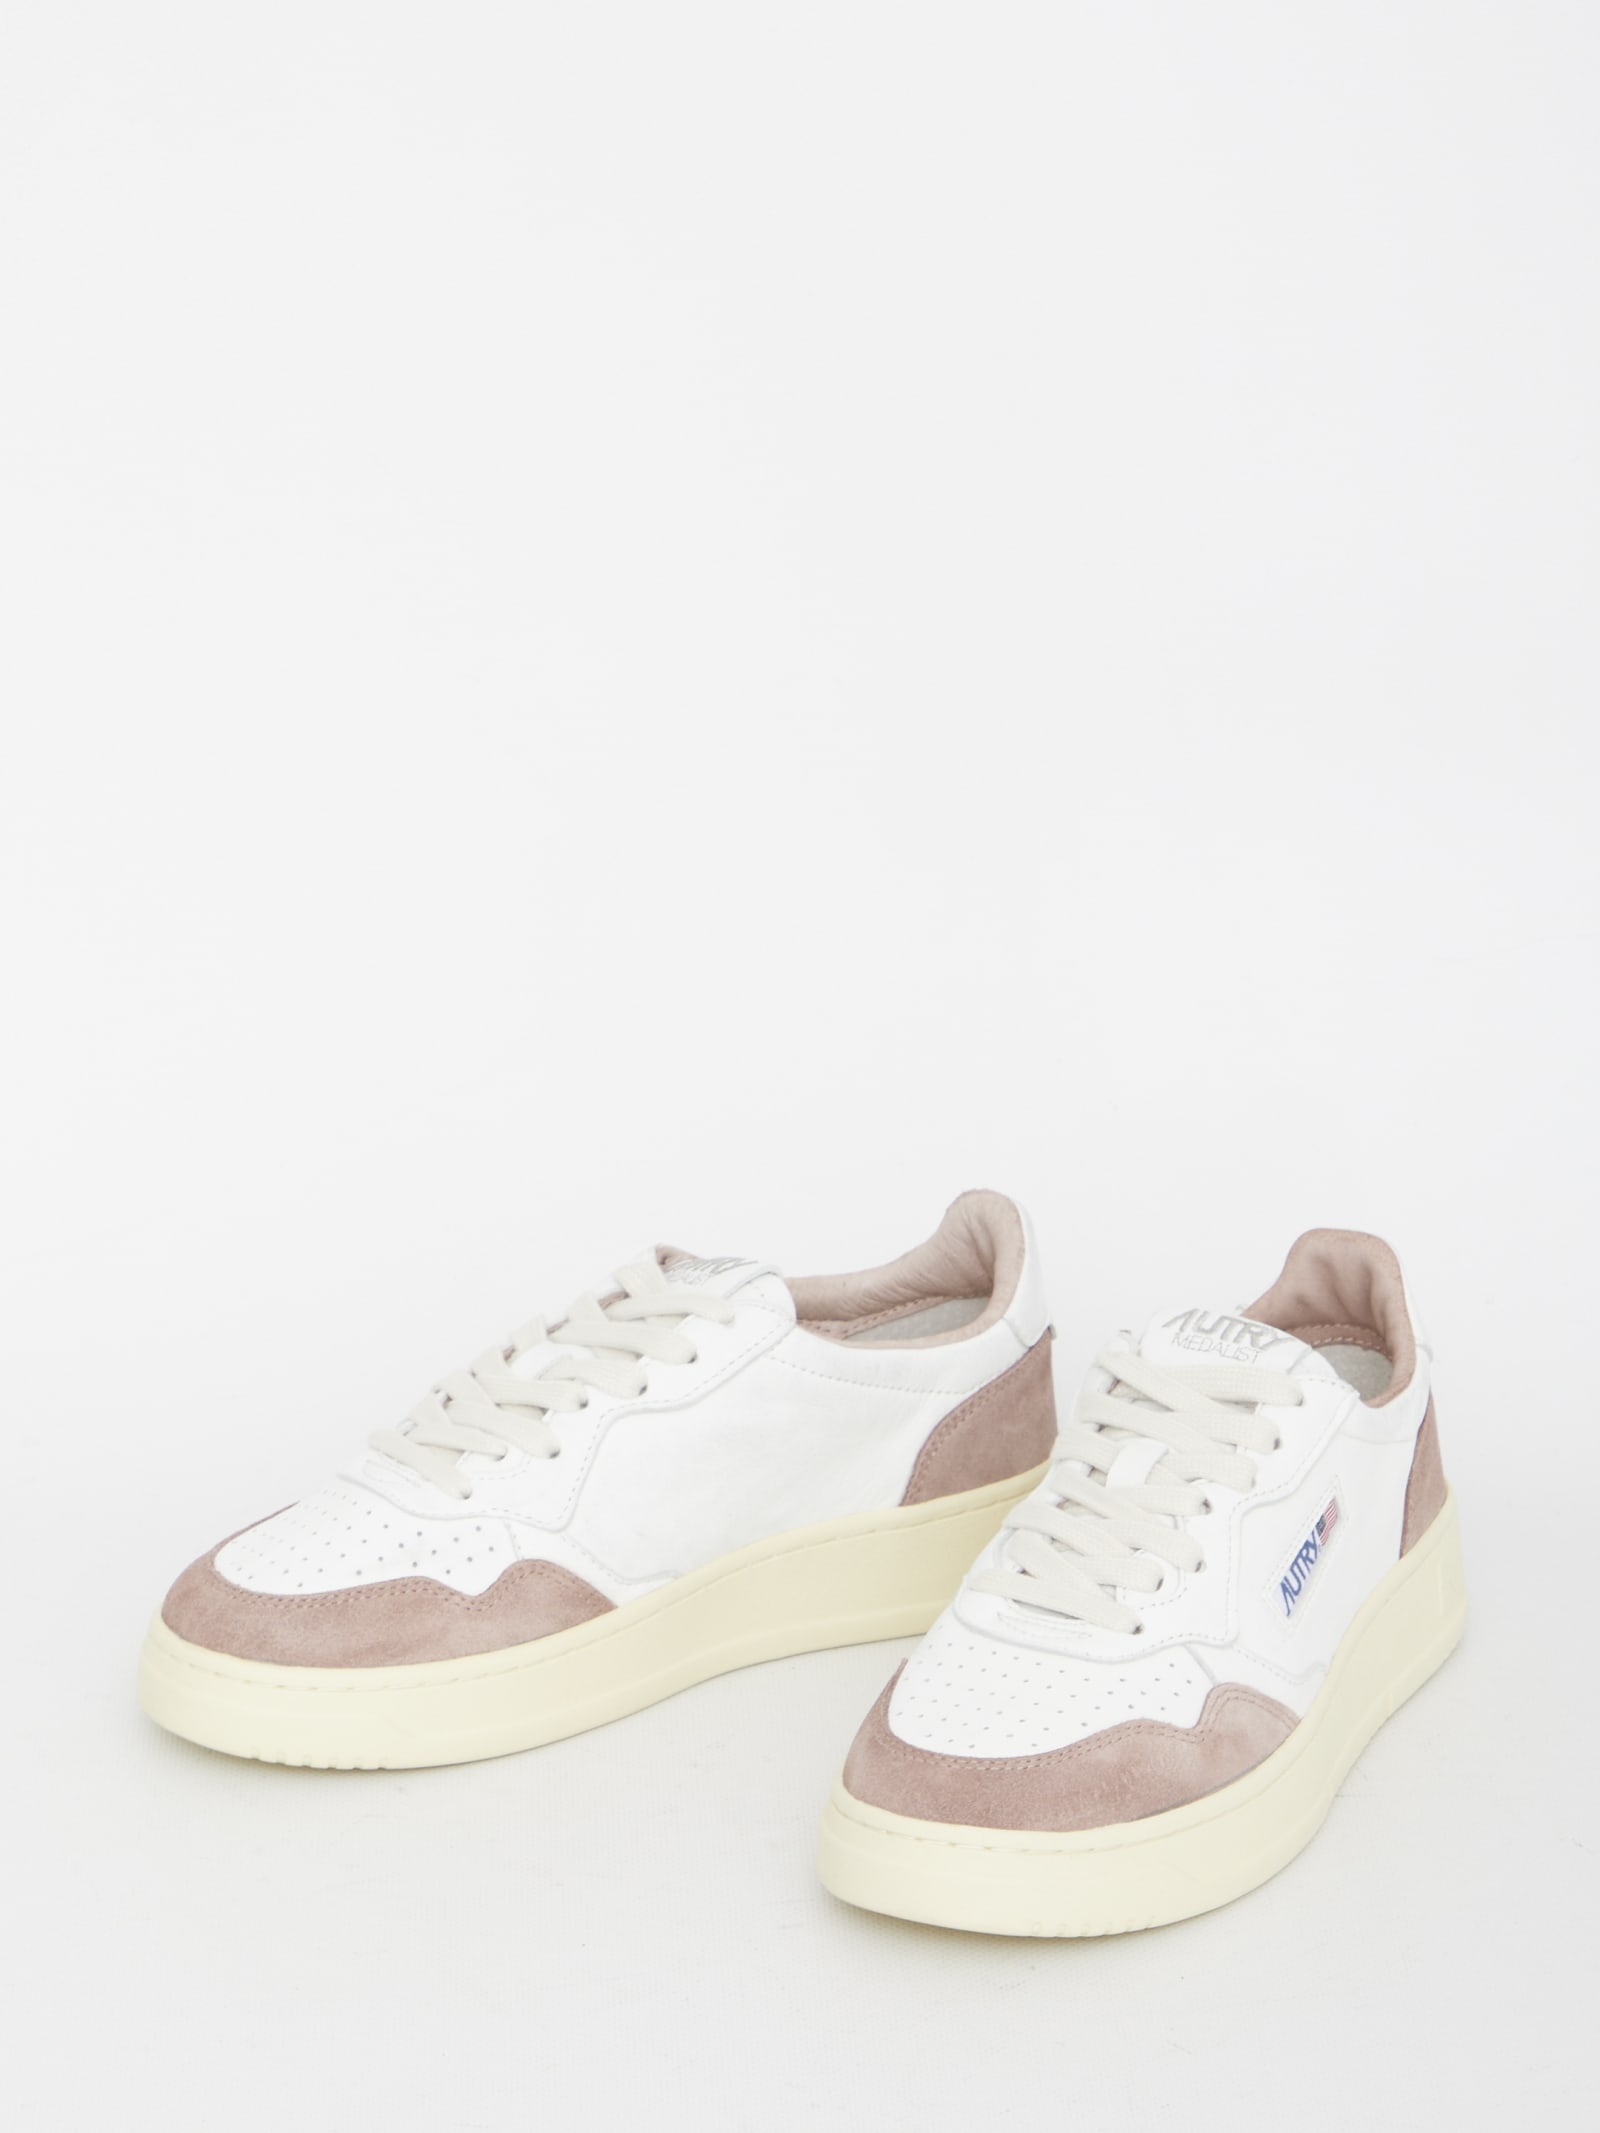 Shop Autry Medalist Sneakers In White, Pink